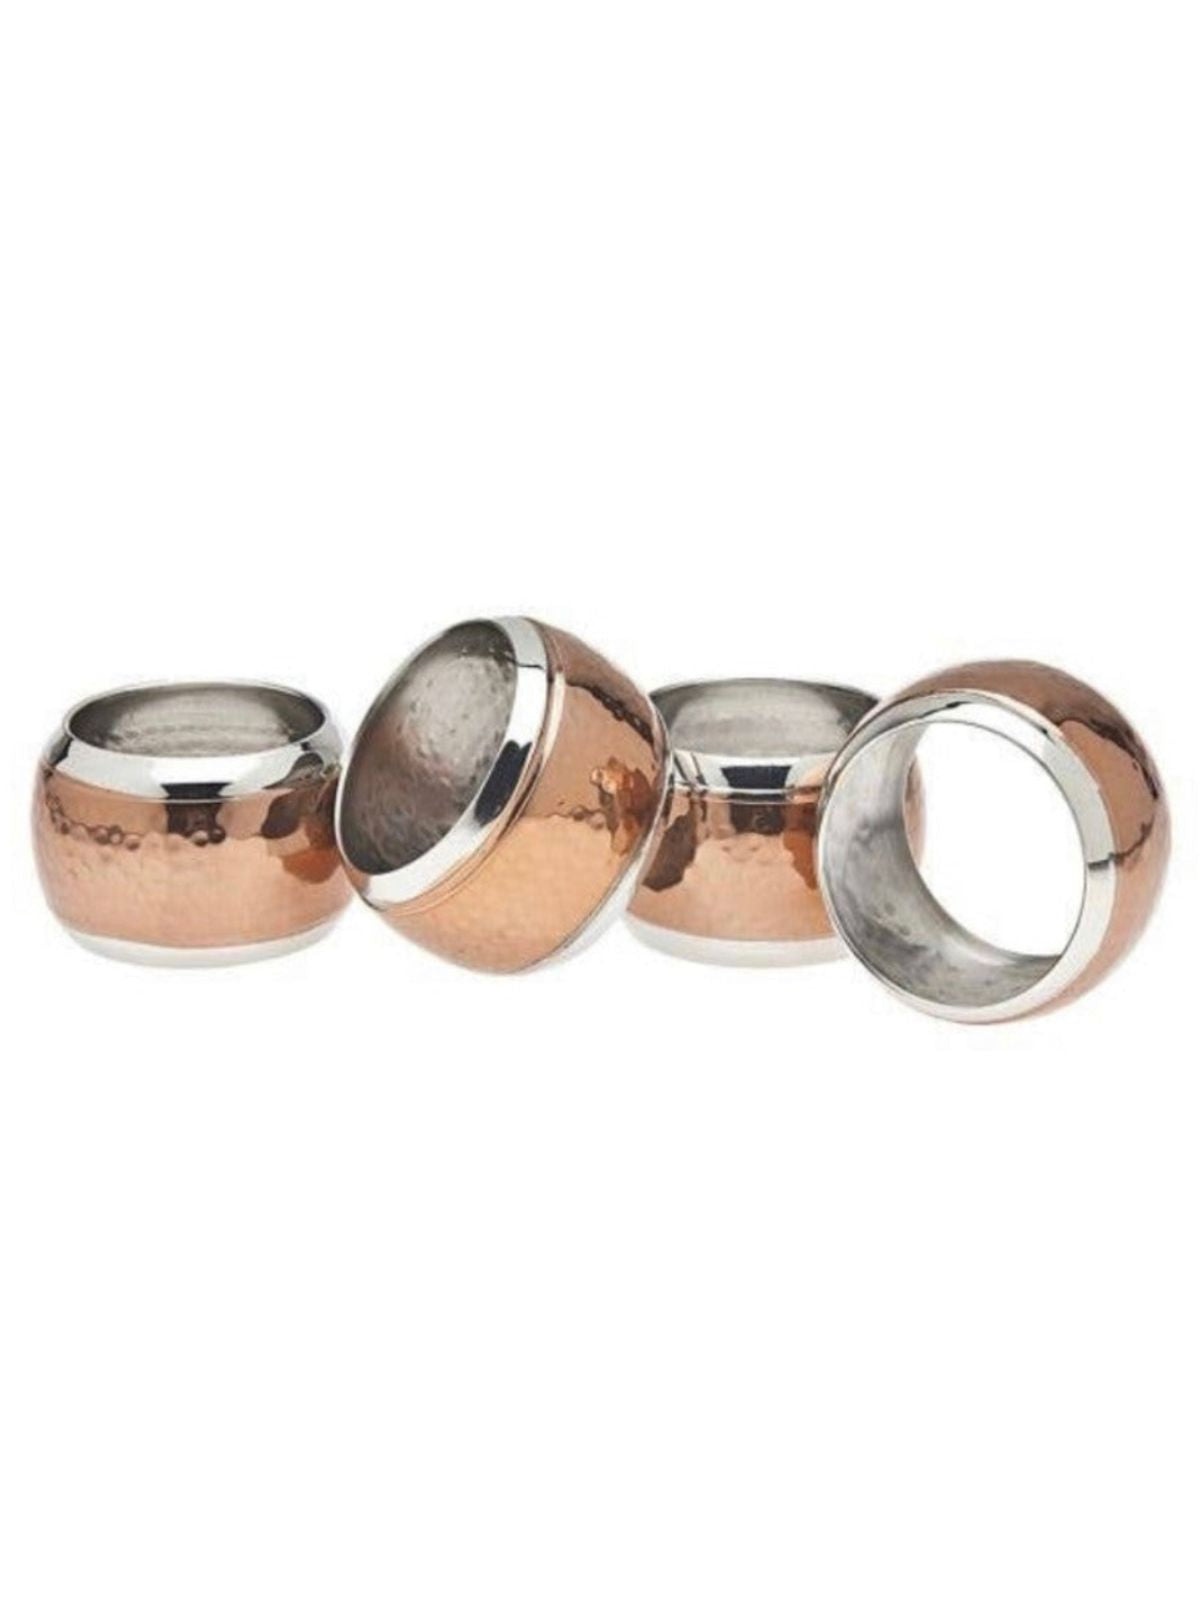 Set of 5 Hammered Copper Round Napkin Rings sold by KYA Home Decor.